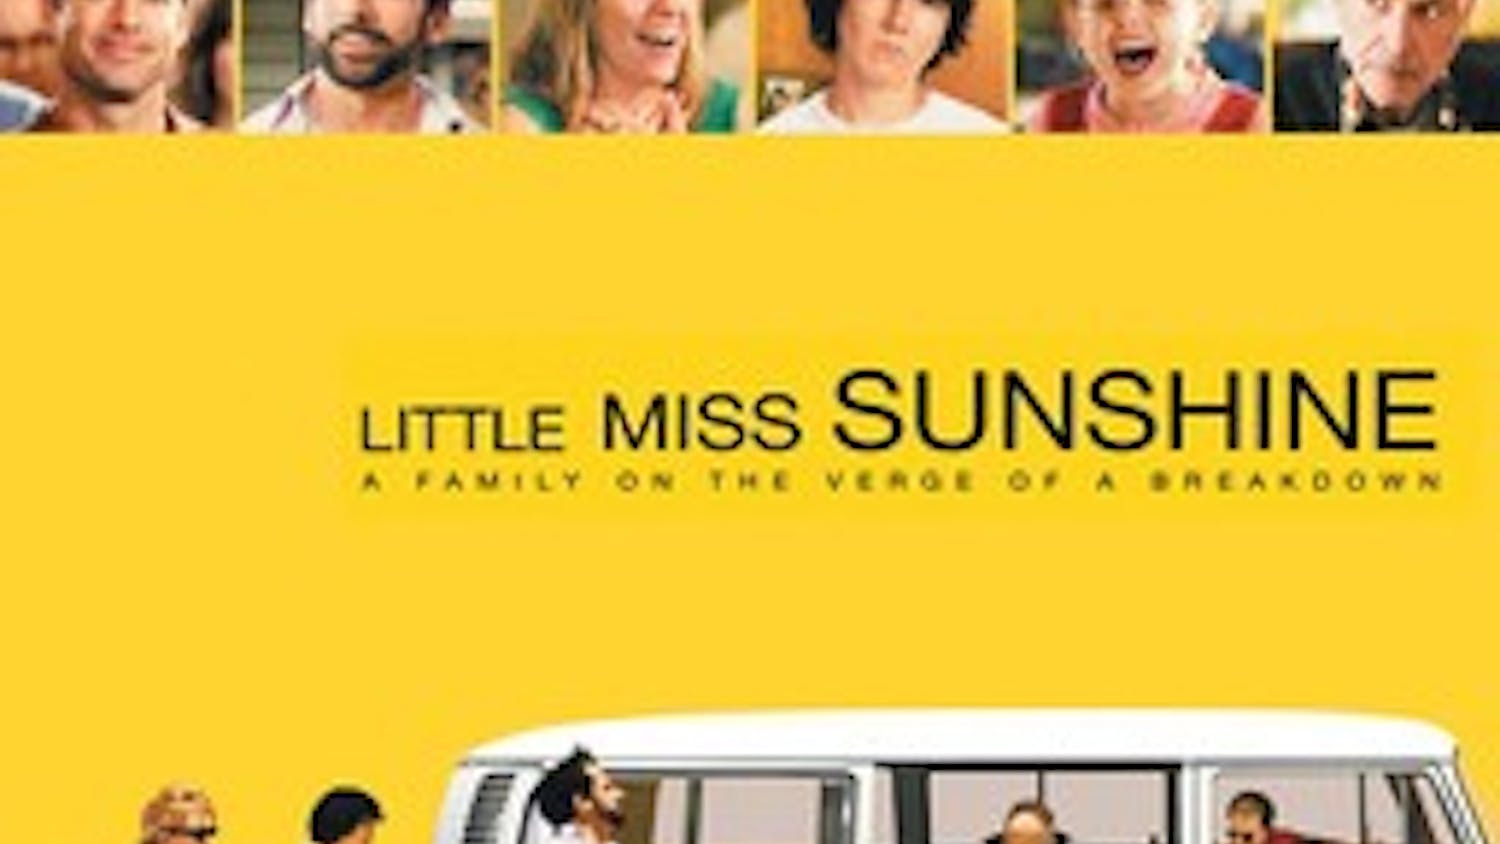 Ten years after the release of "Little Miss Sunshine," few films are able to capture the quirk and ingenuity of this unique movie.